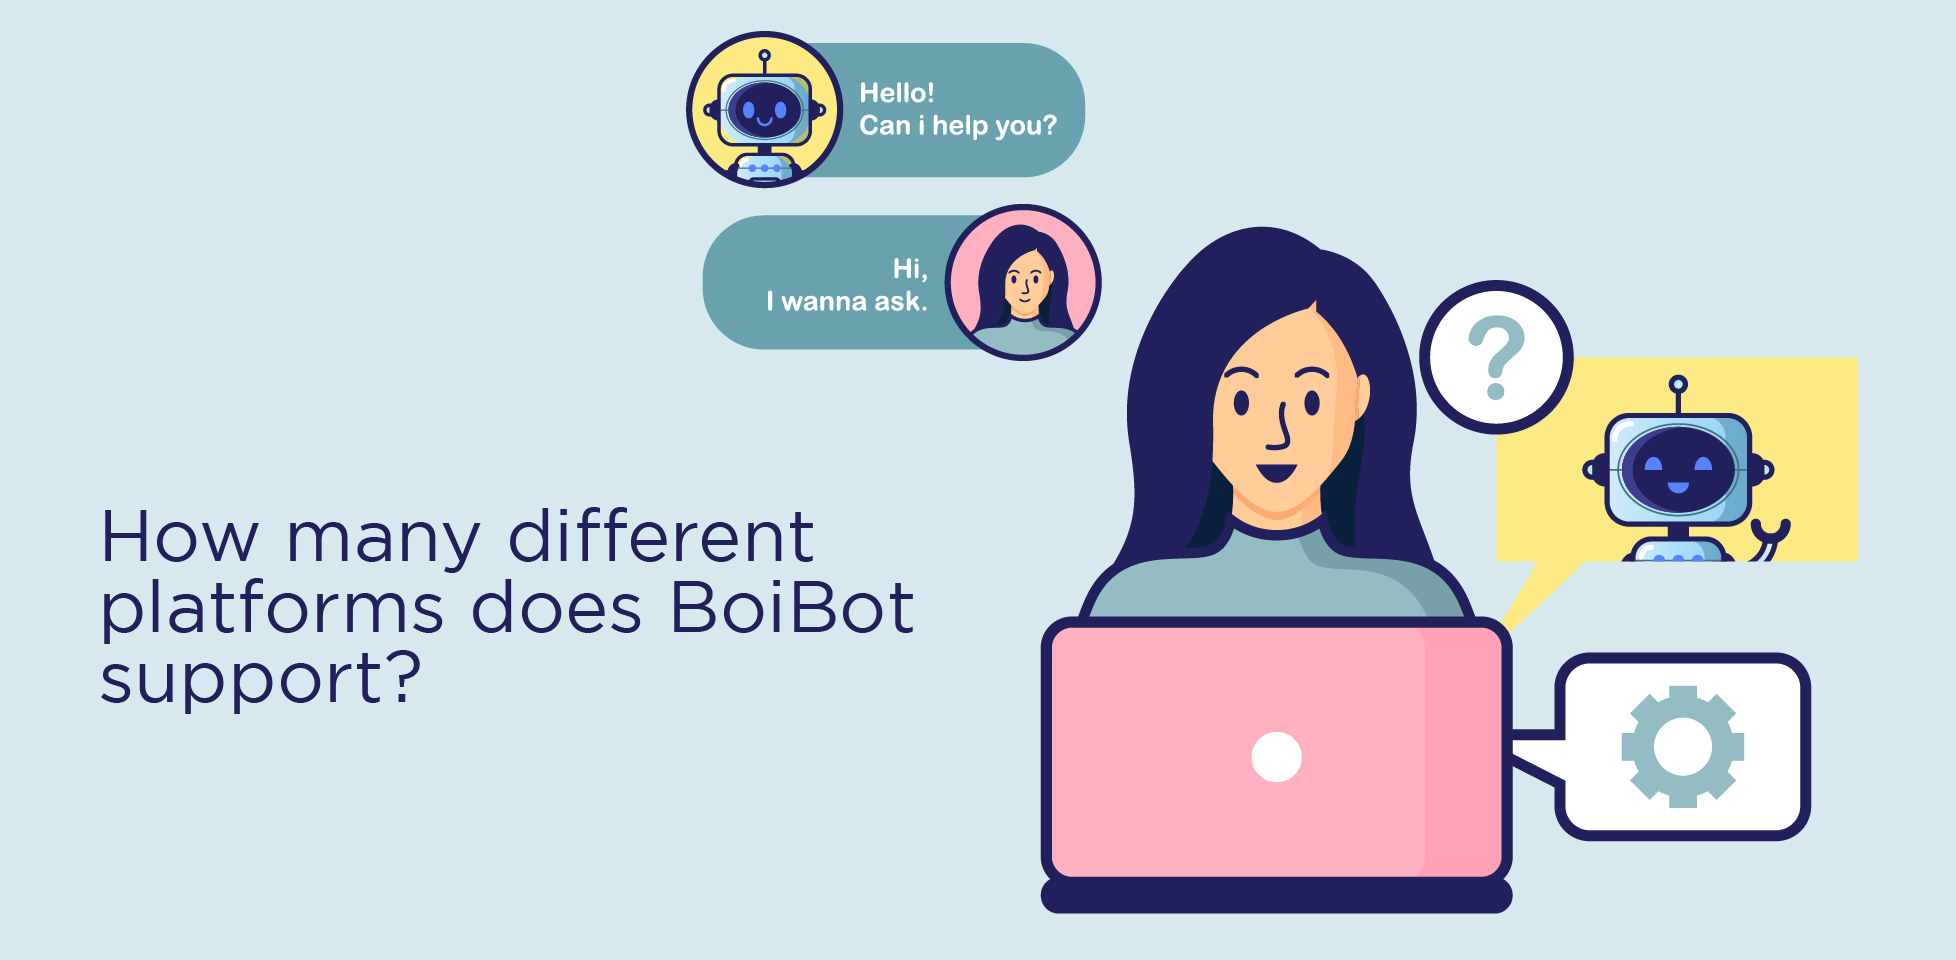 How many different platforms does BoiBot support